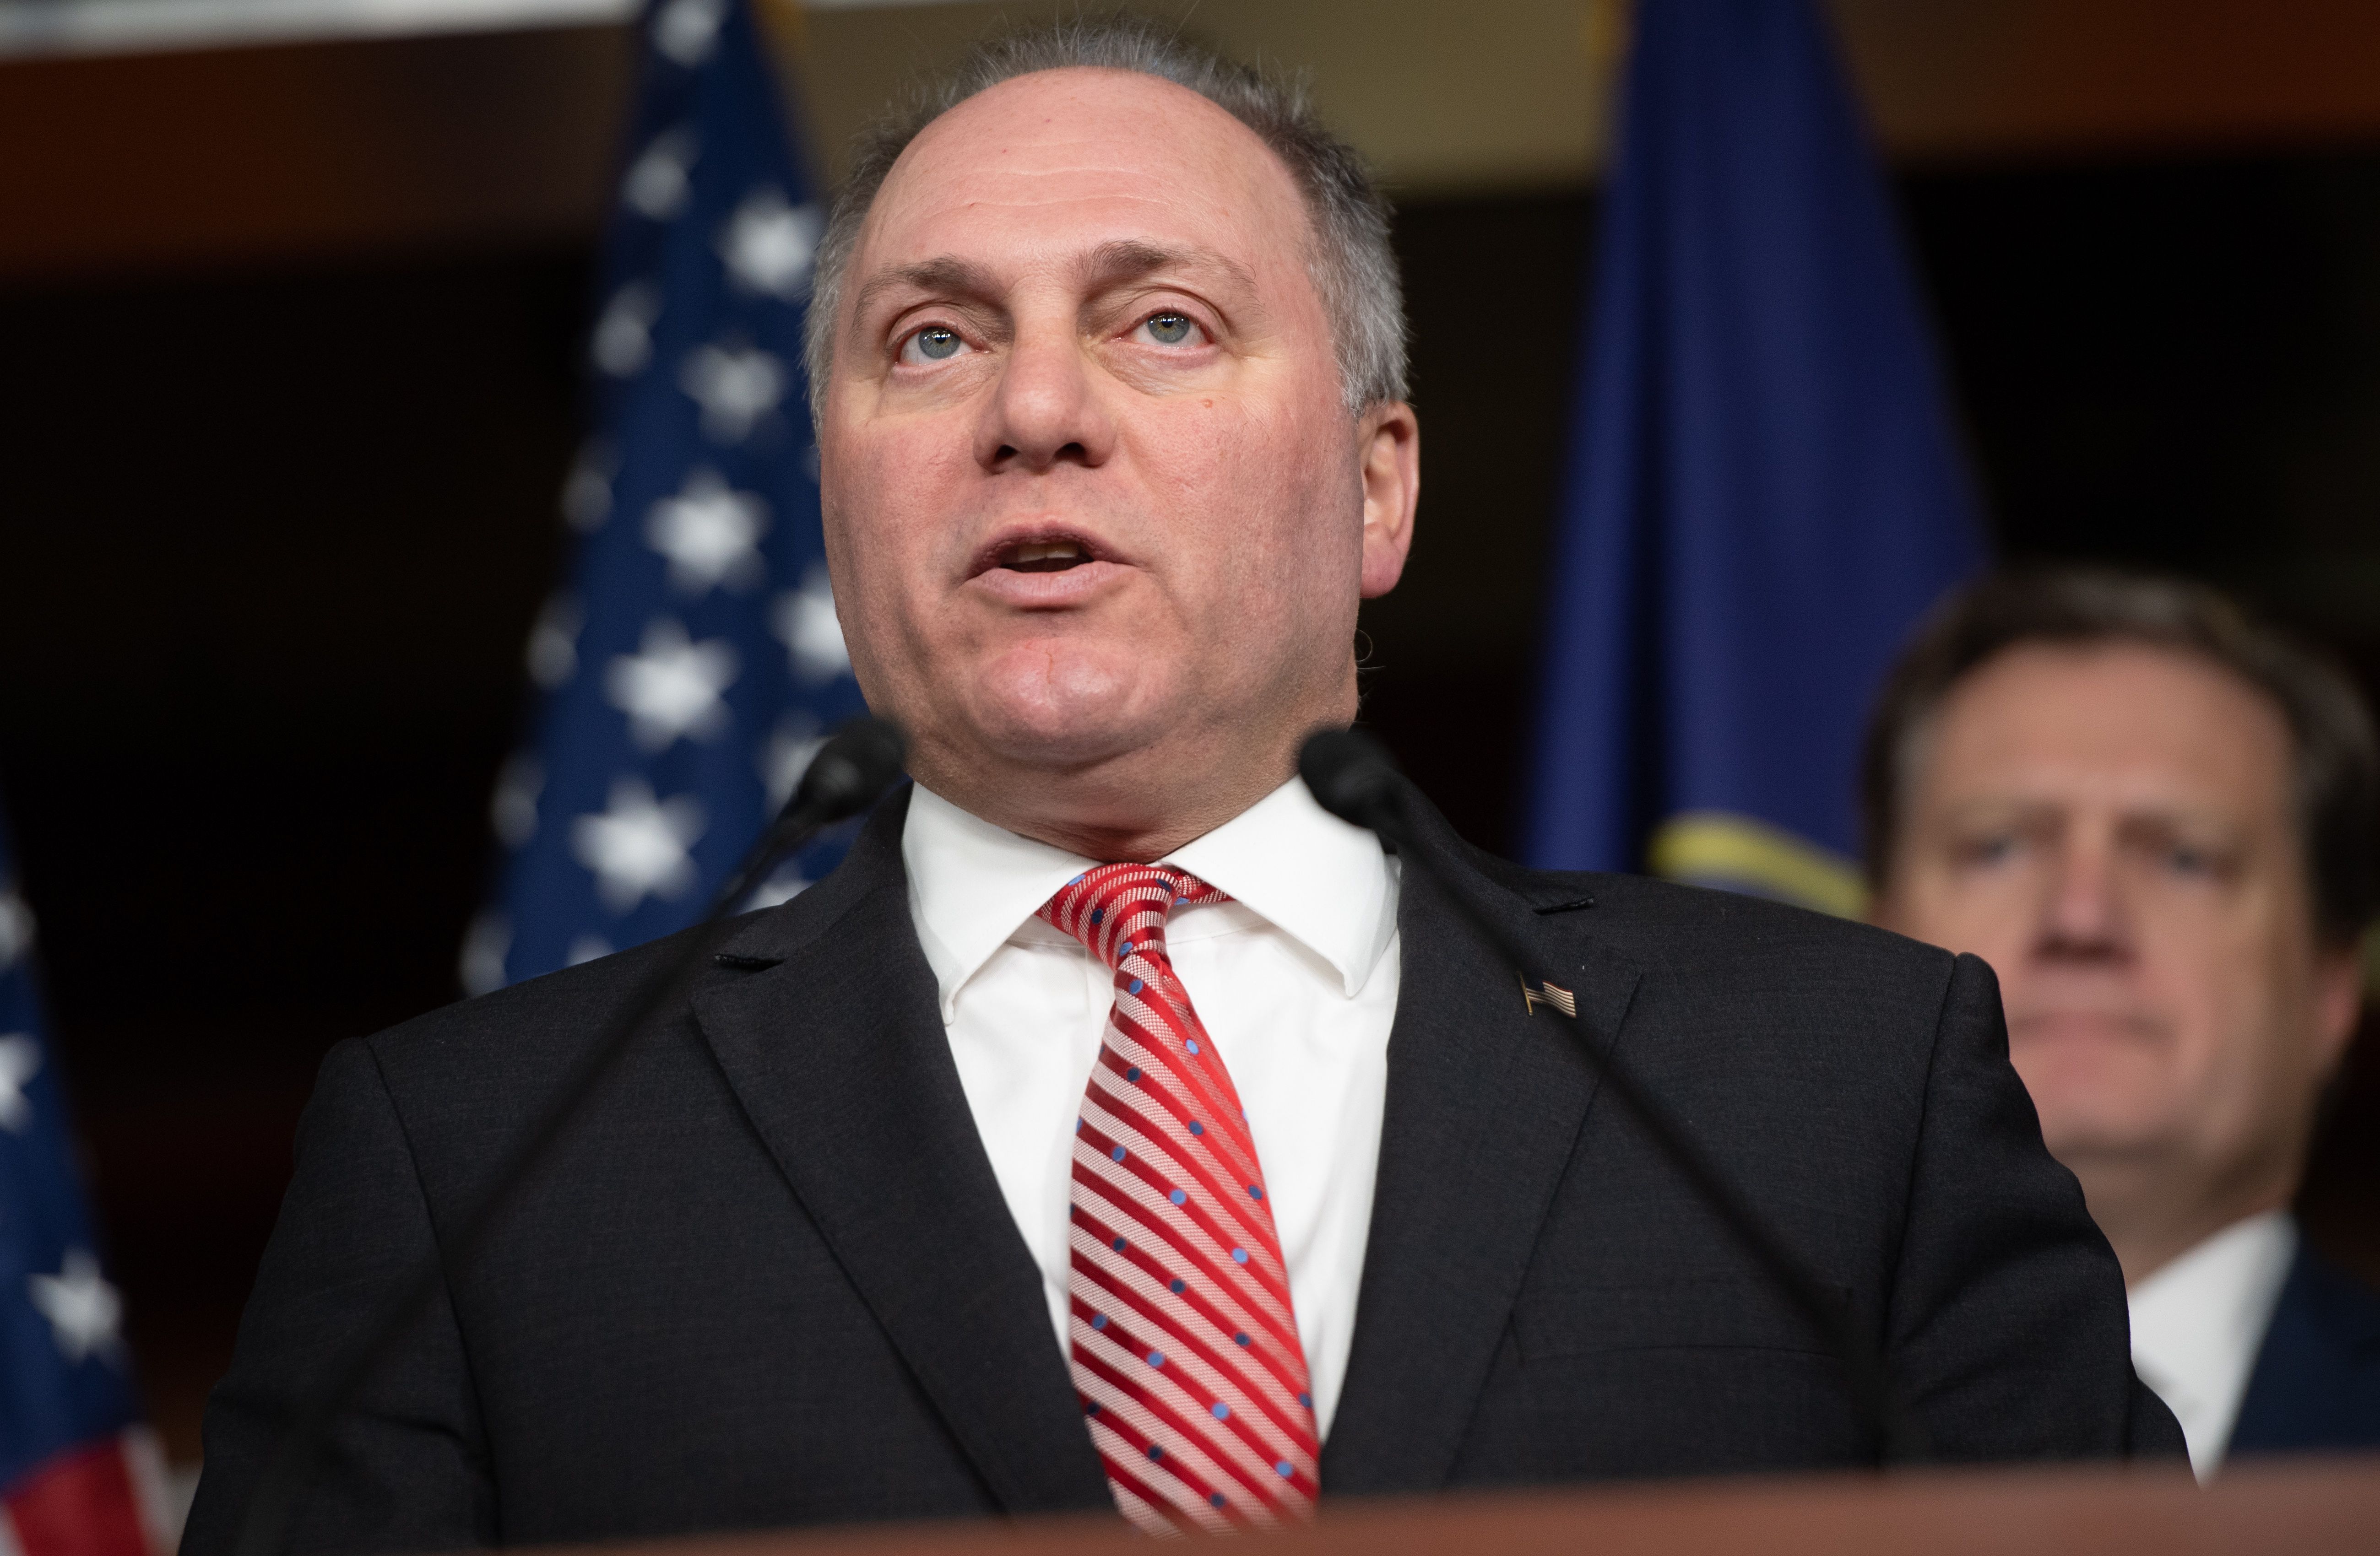 House Minority Whip Steve Scalise, a Republican from Louisiana, speaks during a news conference on Capitol Hill in Washington, DC, on Oct. 22, 2019.